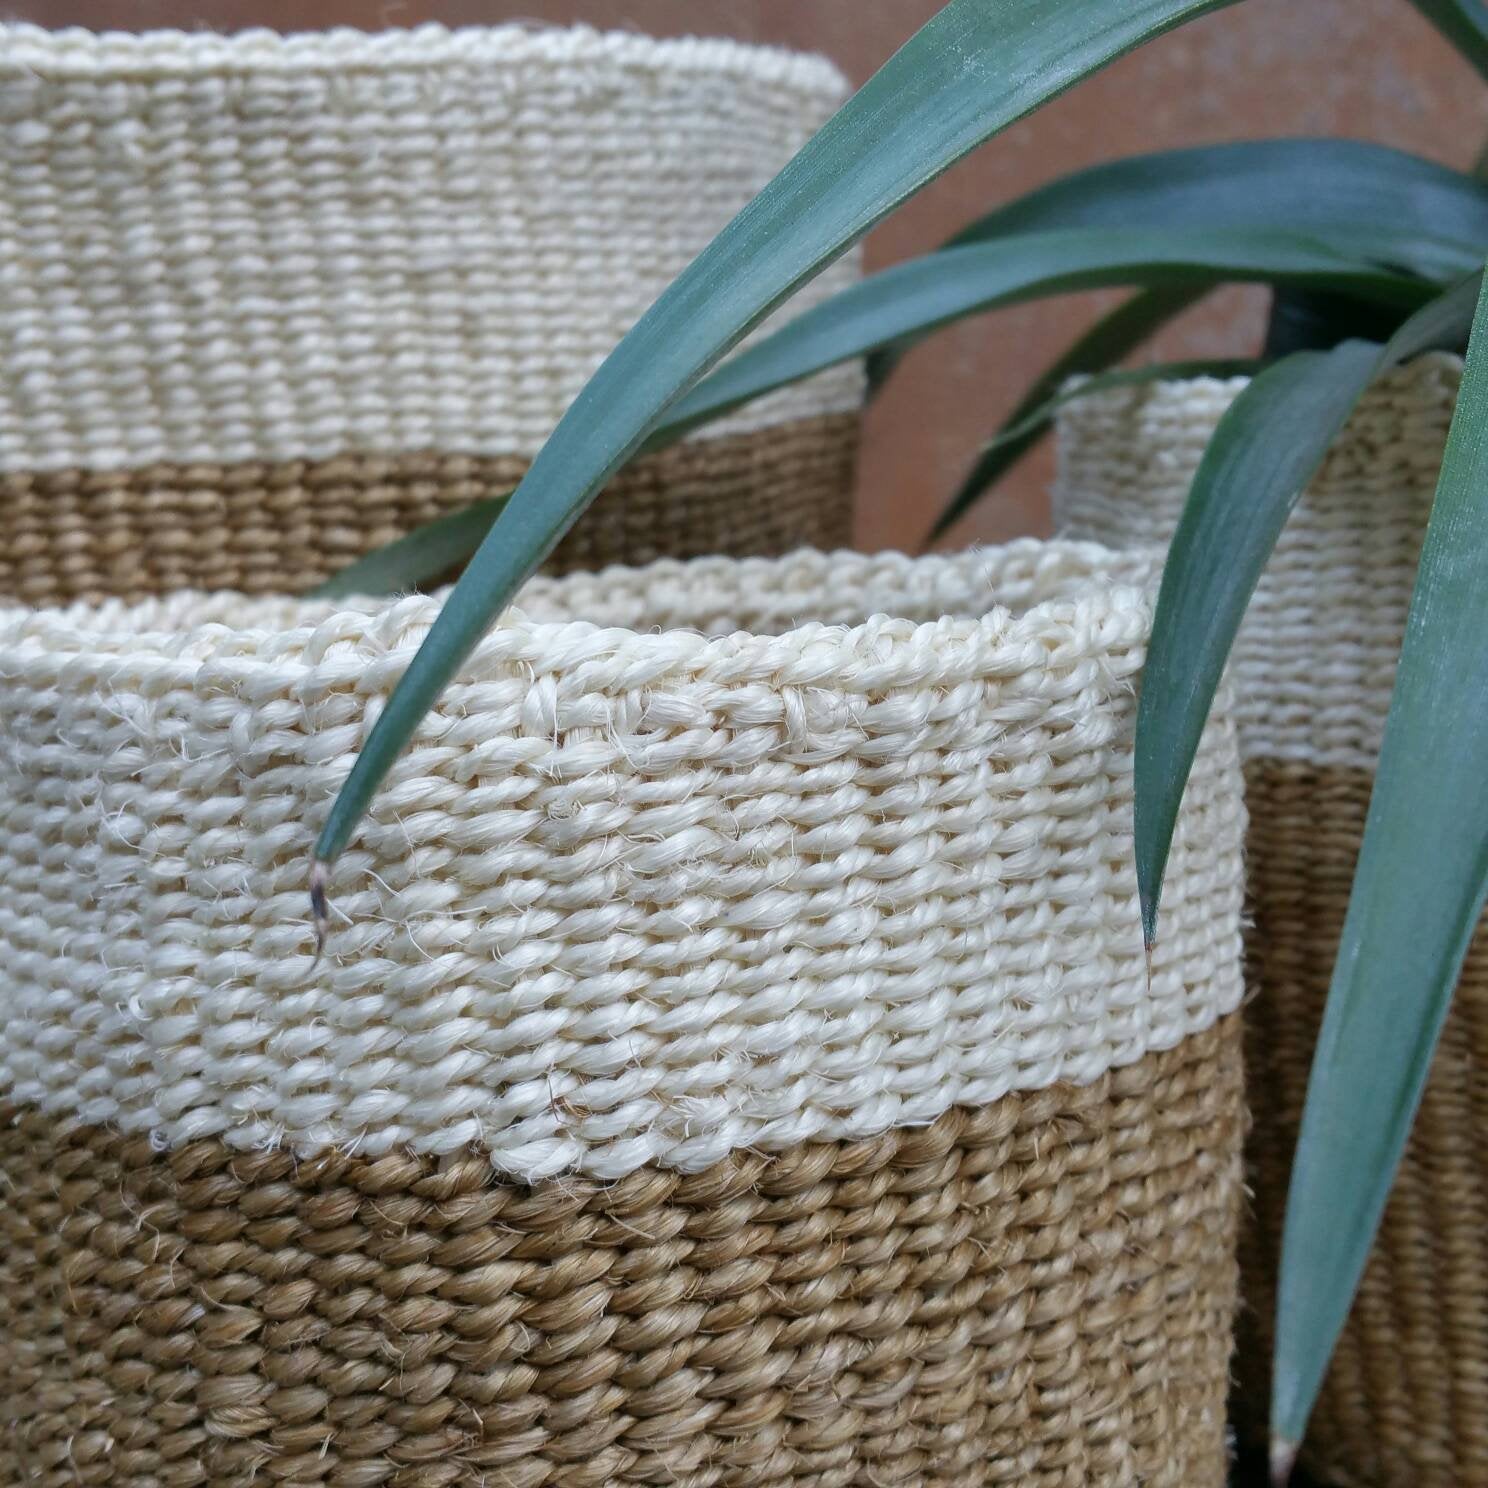 Special Handwoven planting basket